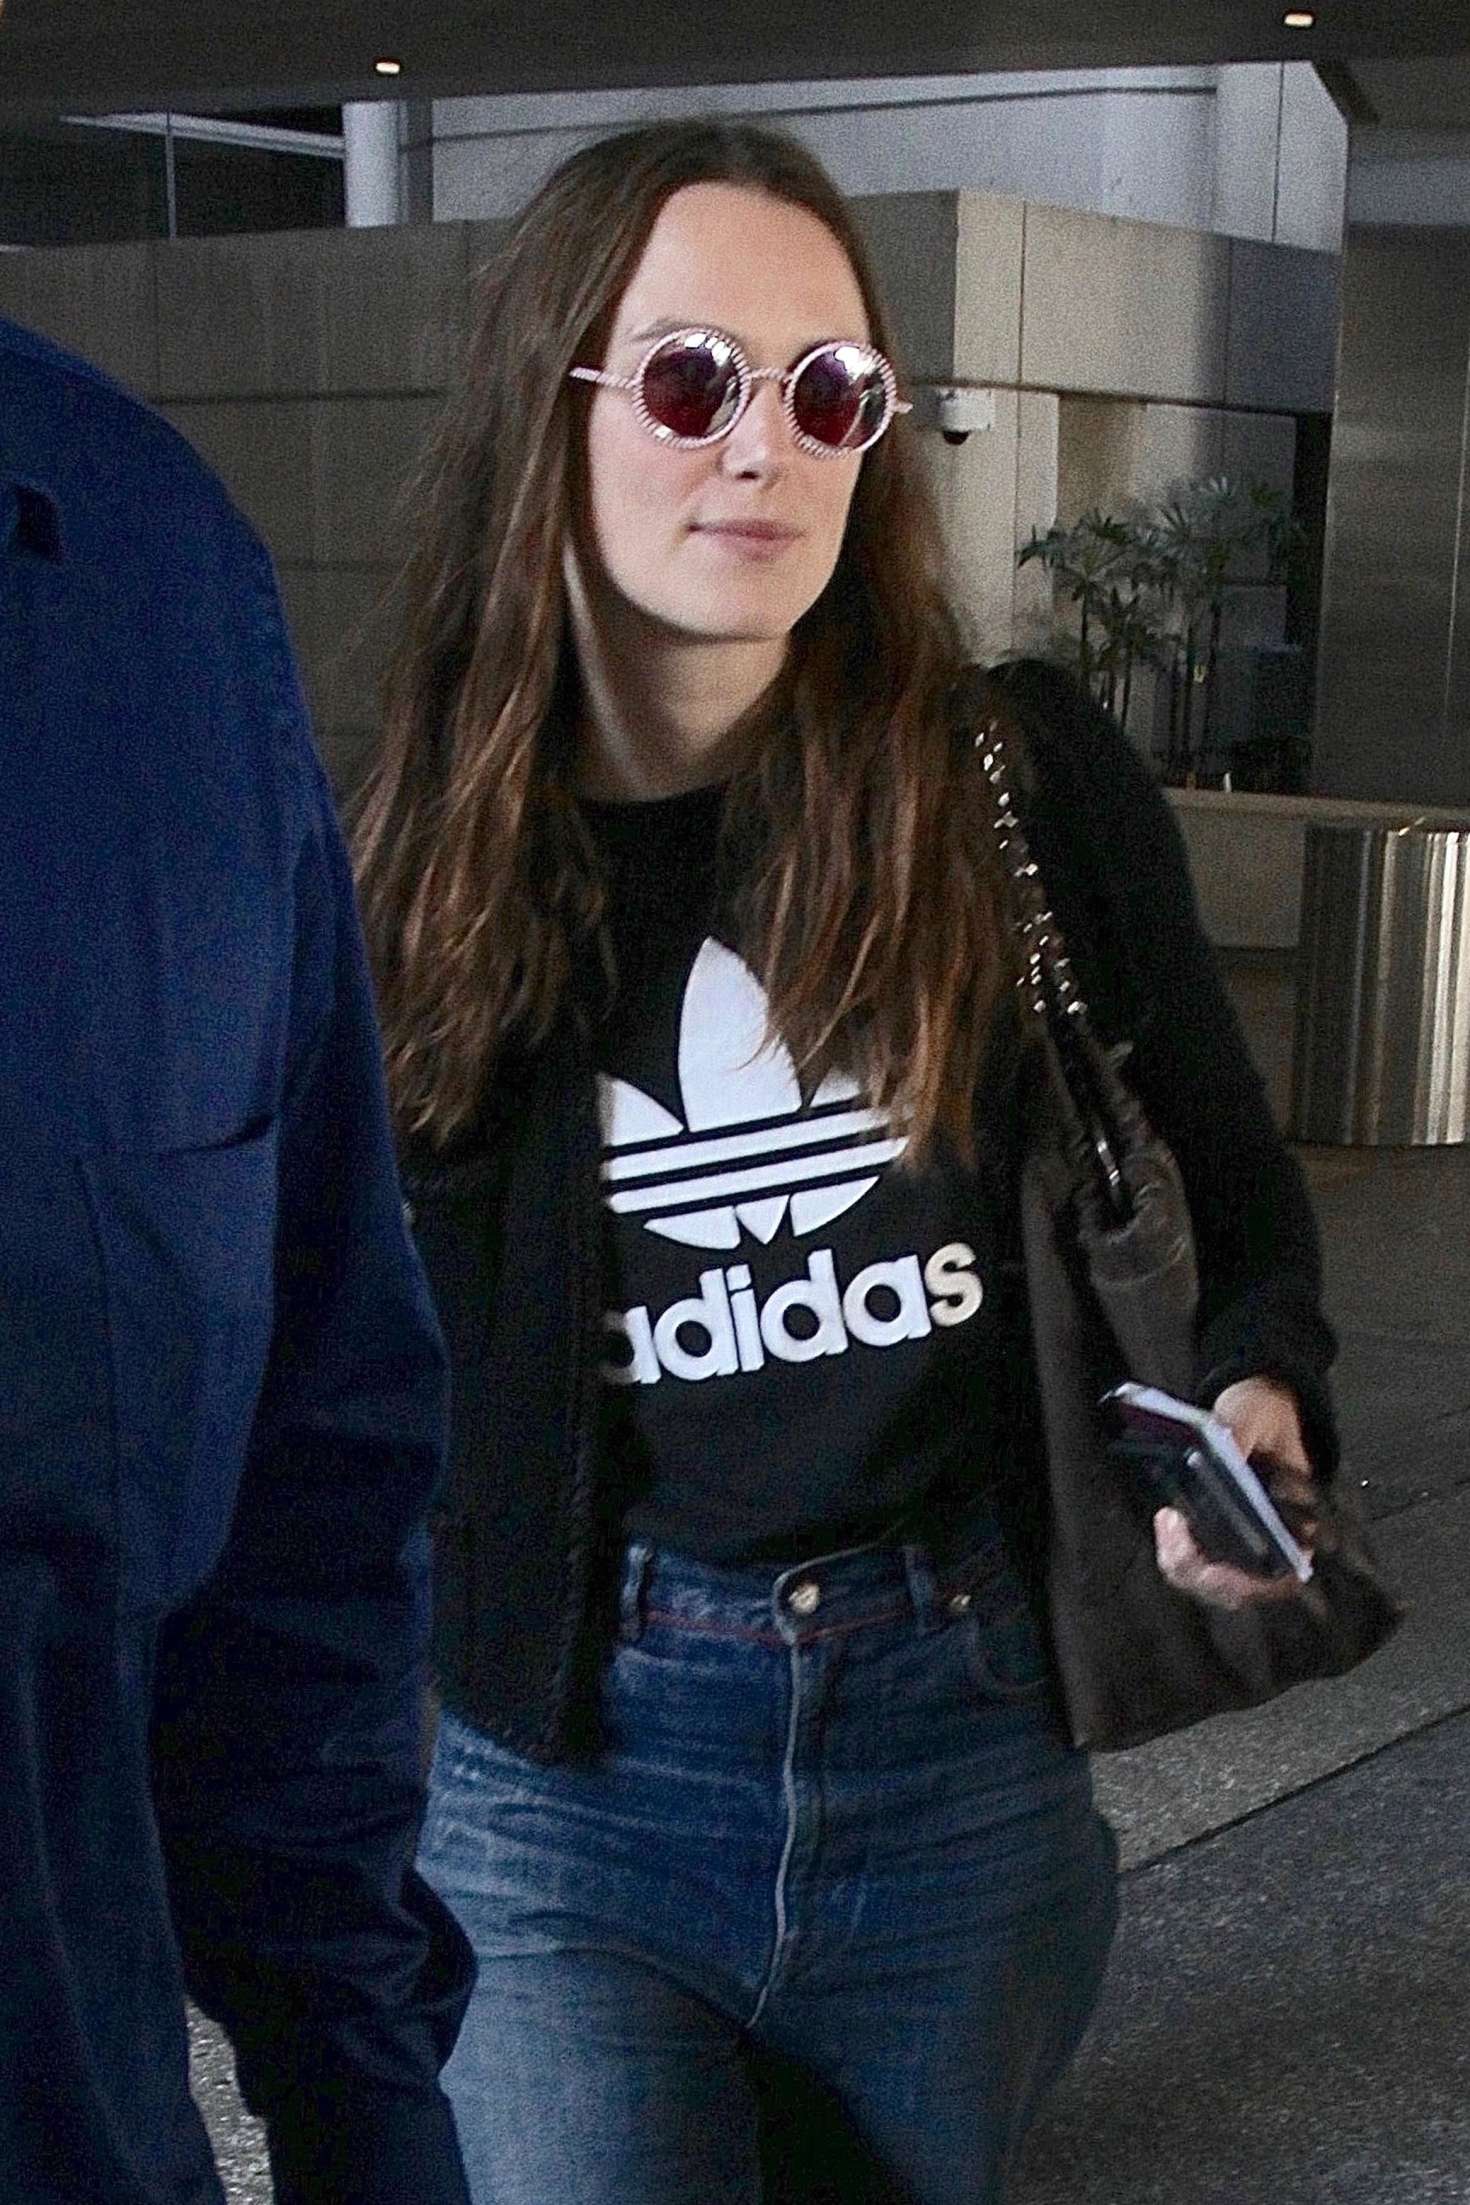 Keira Knightley â€“ Arriving at LAX Airport in Los Angeles